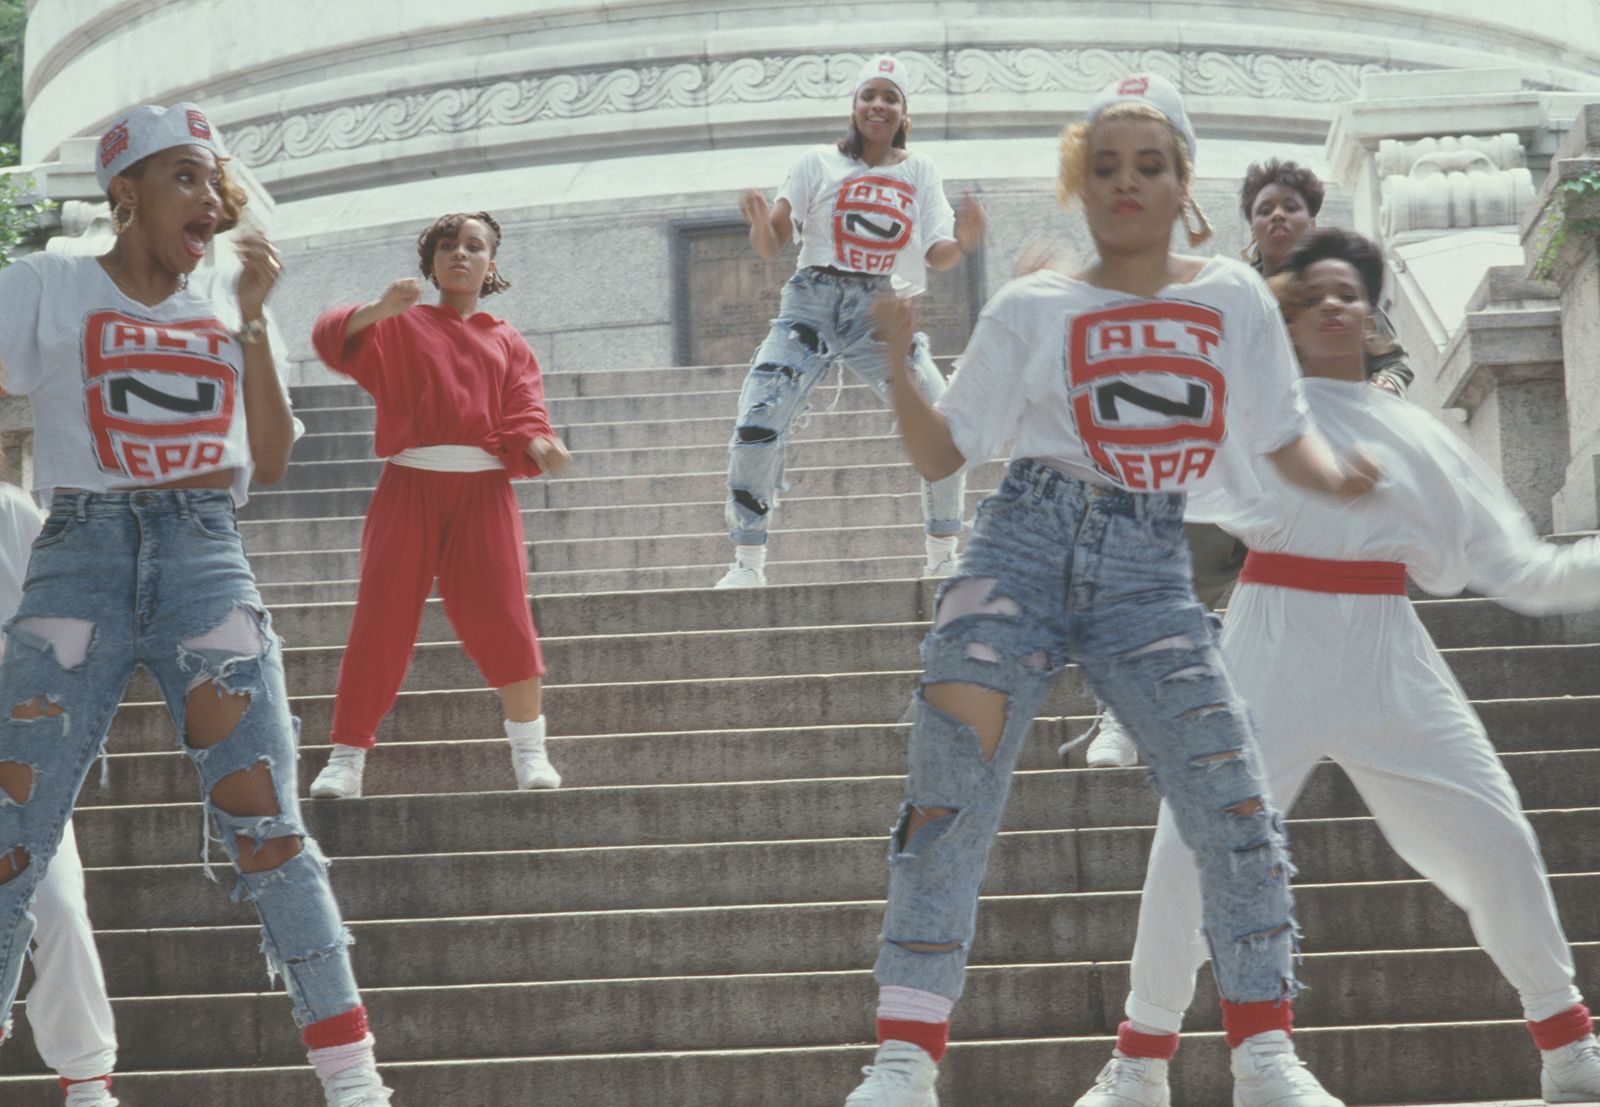 80s Fashion - Clothes Worn in the 1980s, Fer Sure